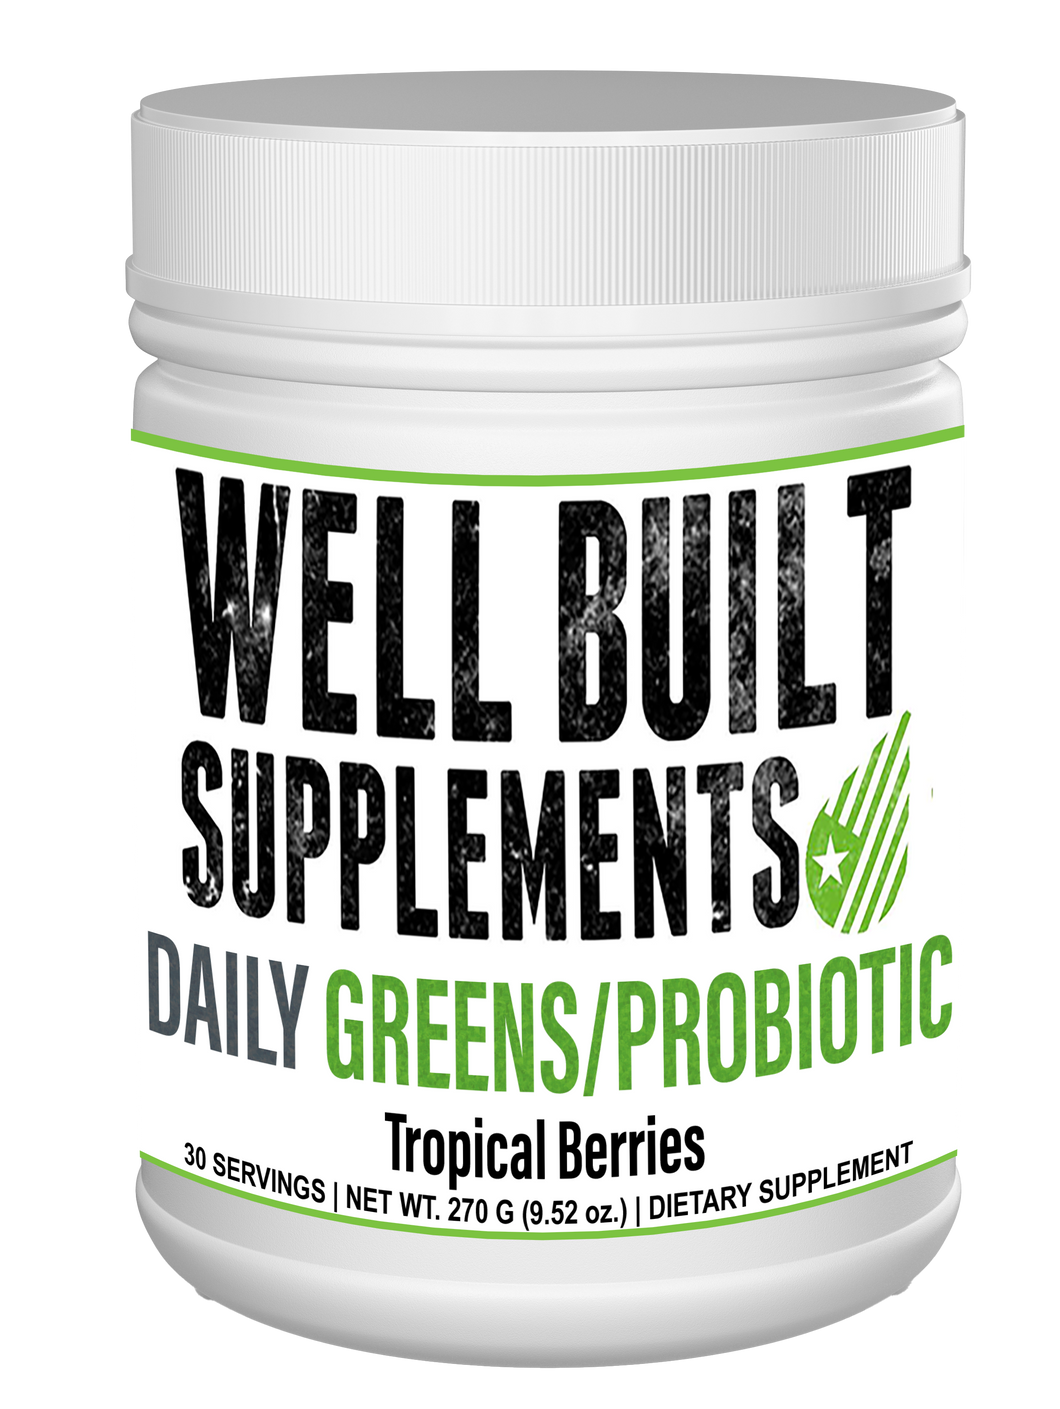 Daily Greens/Probiotic